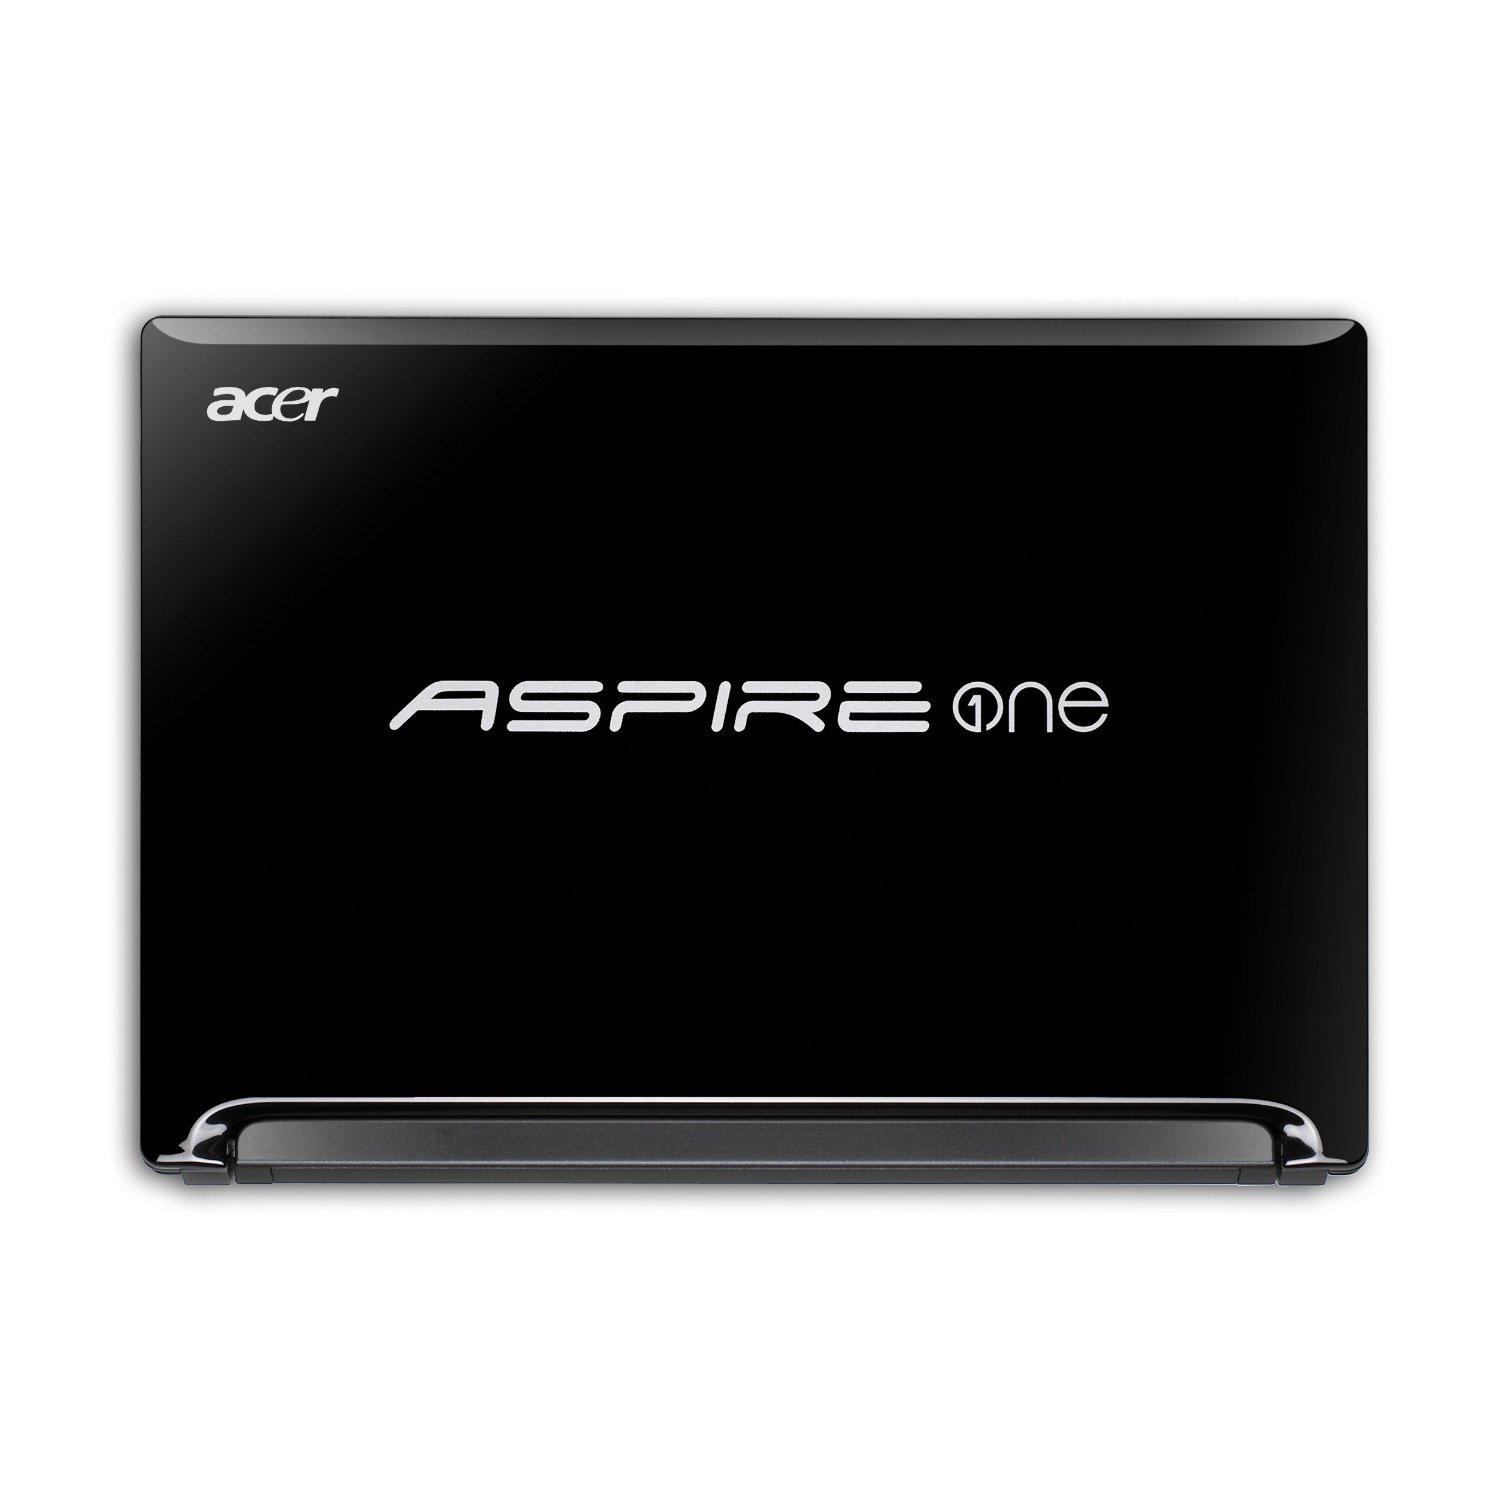 Aspire one d255. Acer Aspire one d255. Нетбук Acer Aspire one d255. ASUS d255 Aspire one. Нетбук Acer one d255-2bqws.